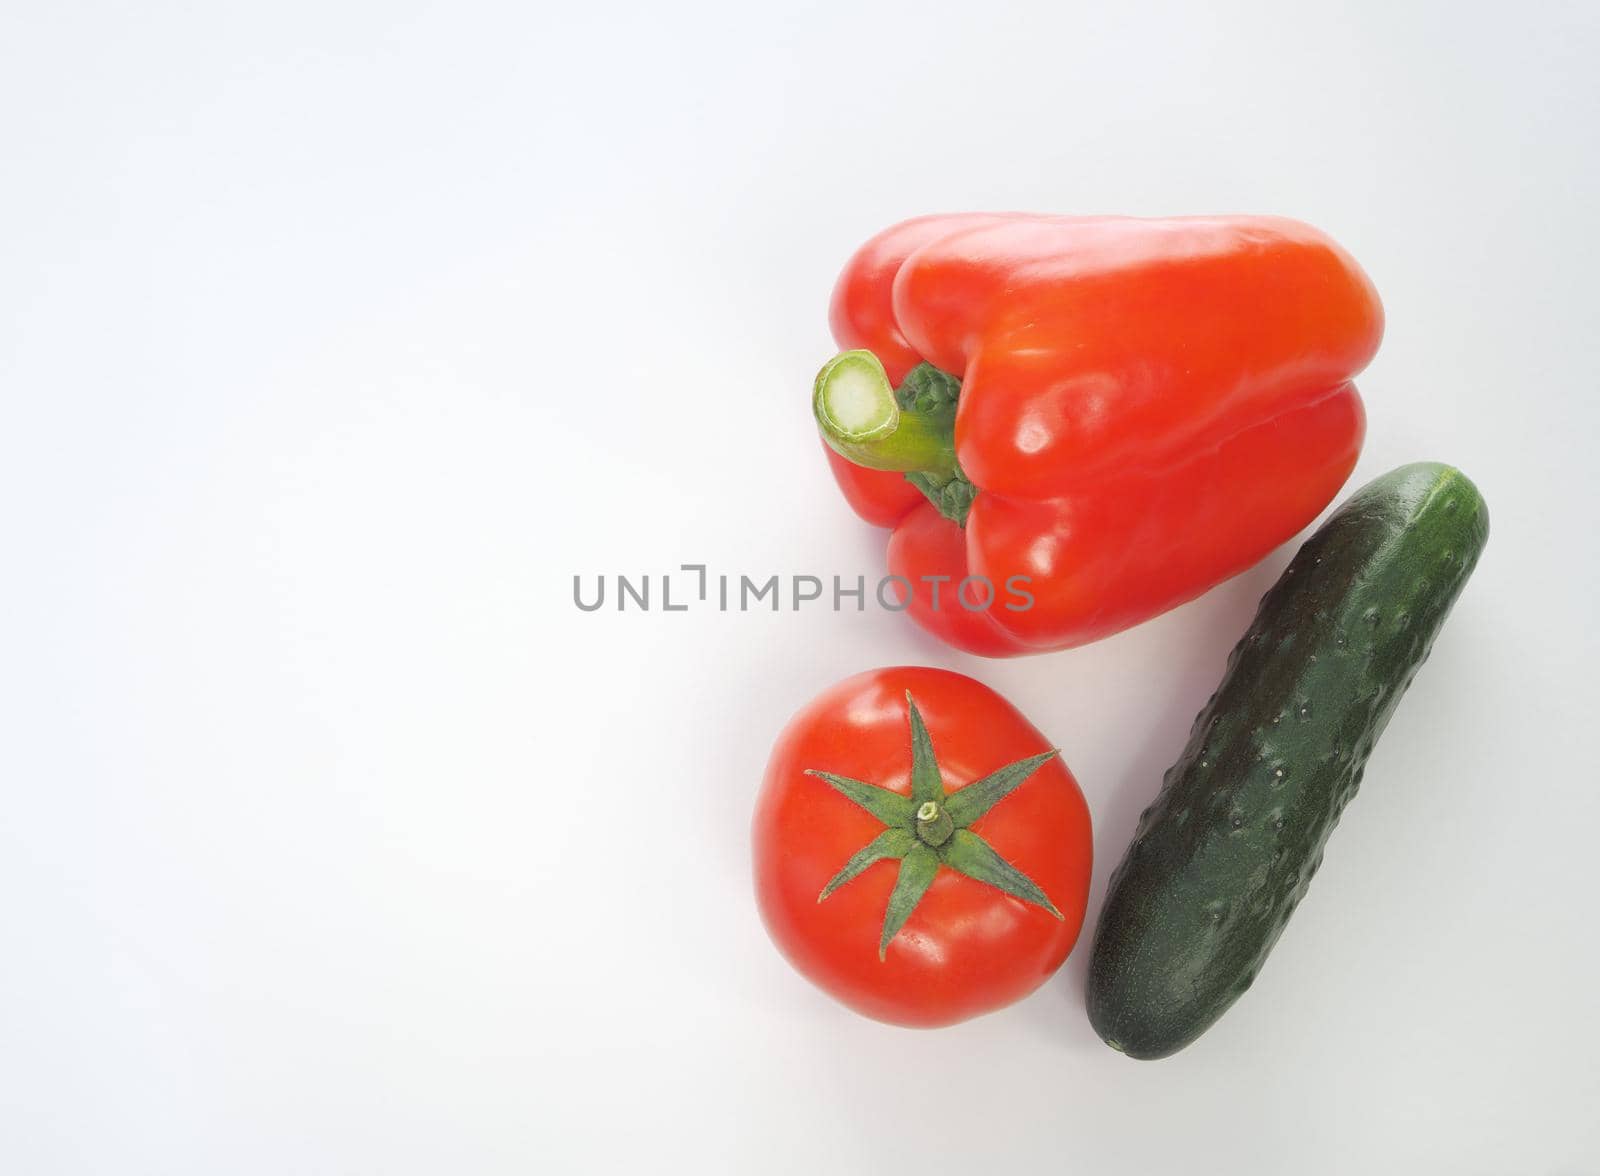 Fresh vegetables. Red tomato, bell pepper, and cucumber. Big plan on a white background.